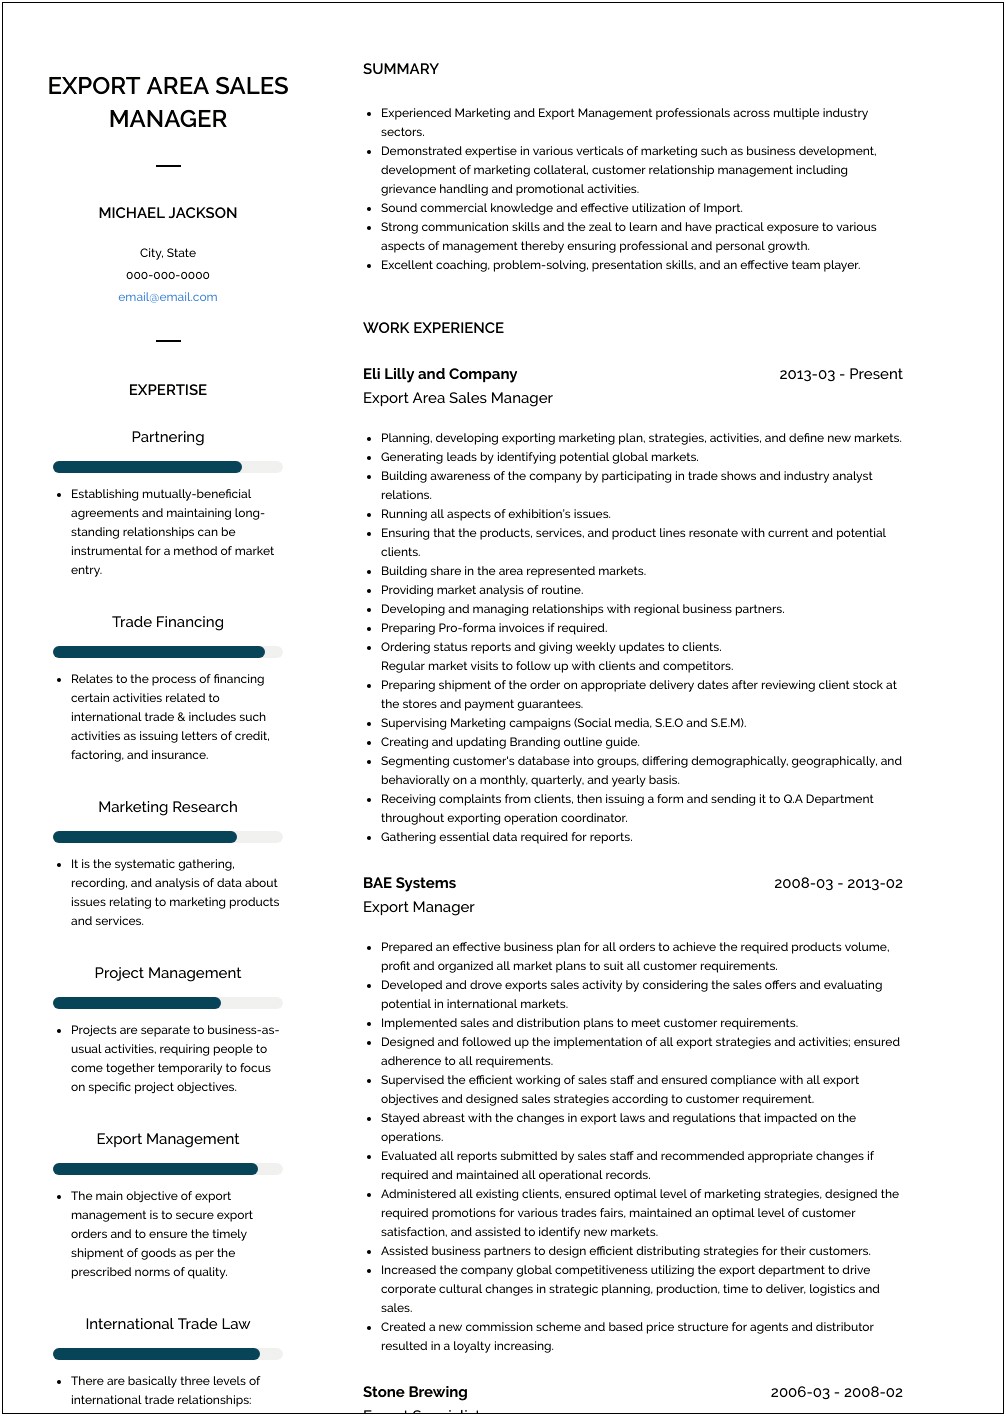 Resume Format For Import Export Manager